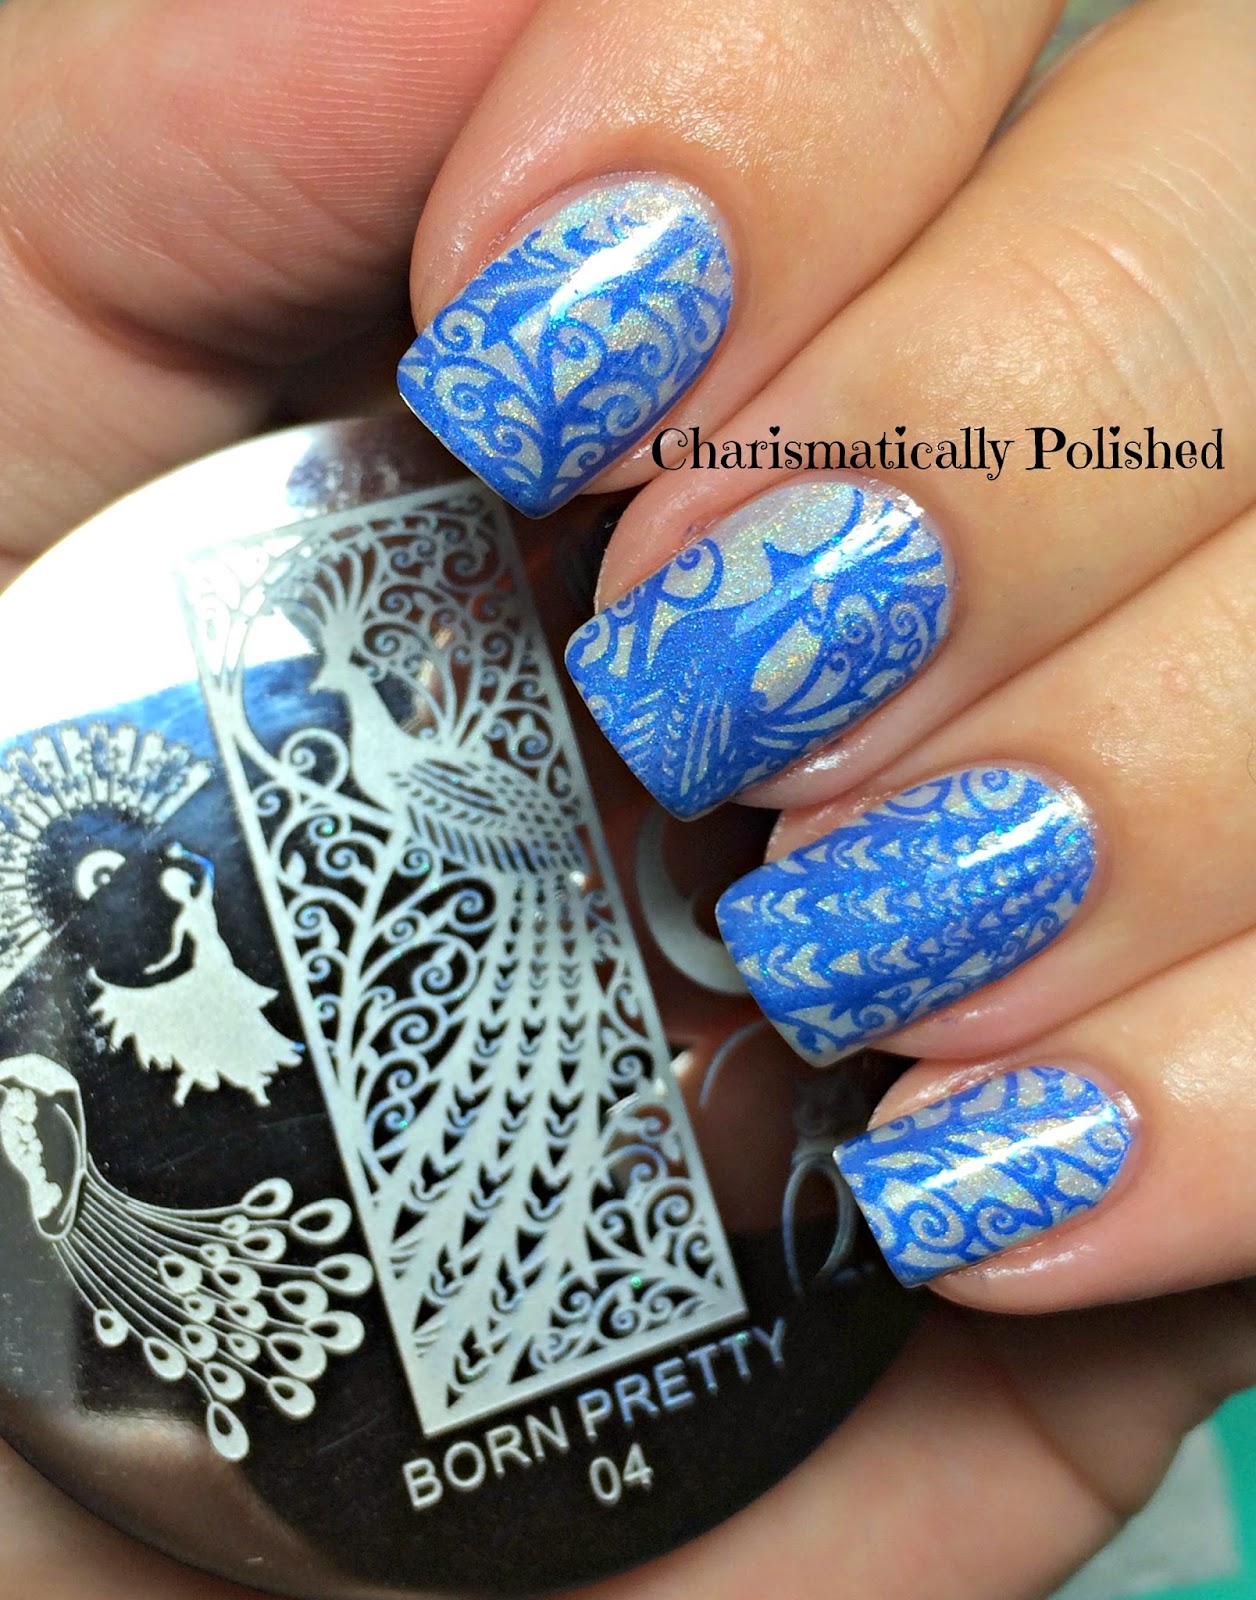 Charismatically Polished: Born Pretty Store Stamping Plate